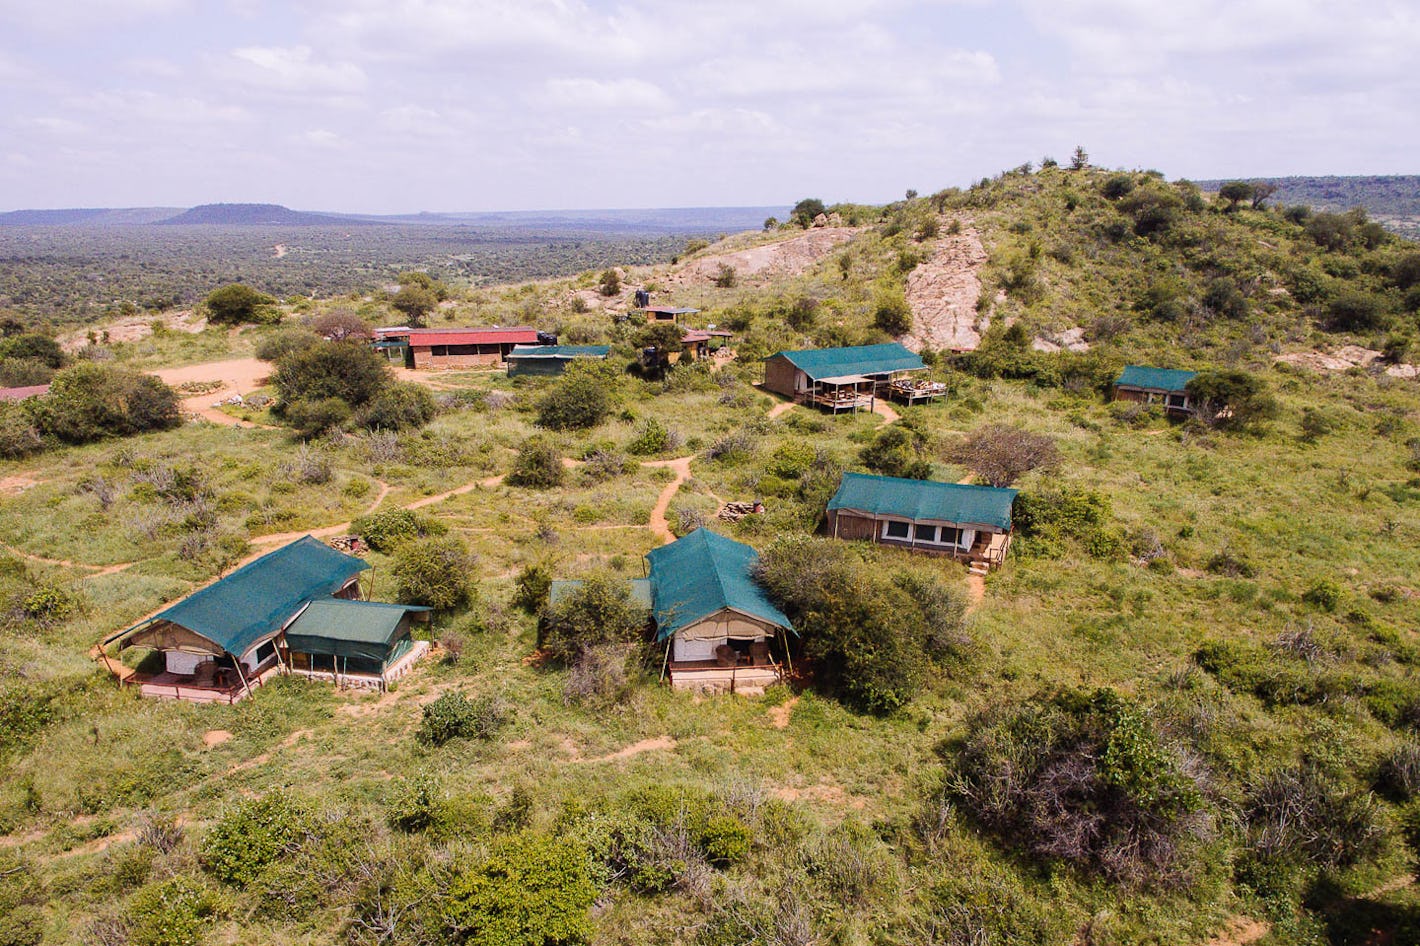 There is a palpable sense of enthusiasm for wildlife from everyone at the camp, and great care is taken to connect you to the area in a meaningful and memorable manner.